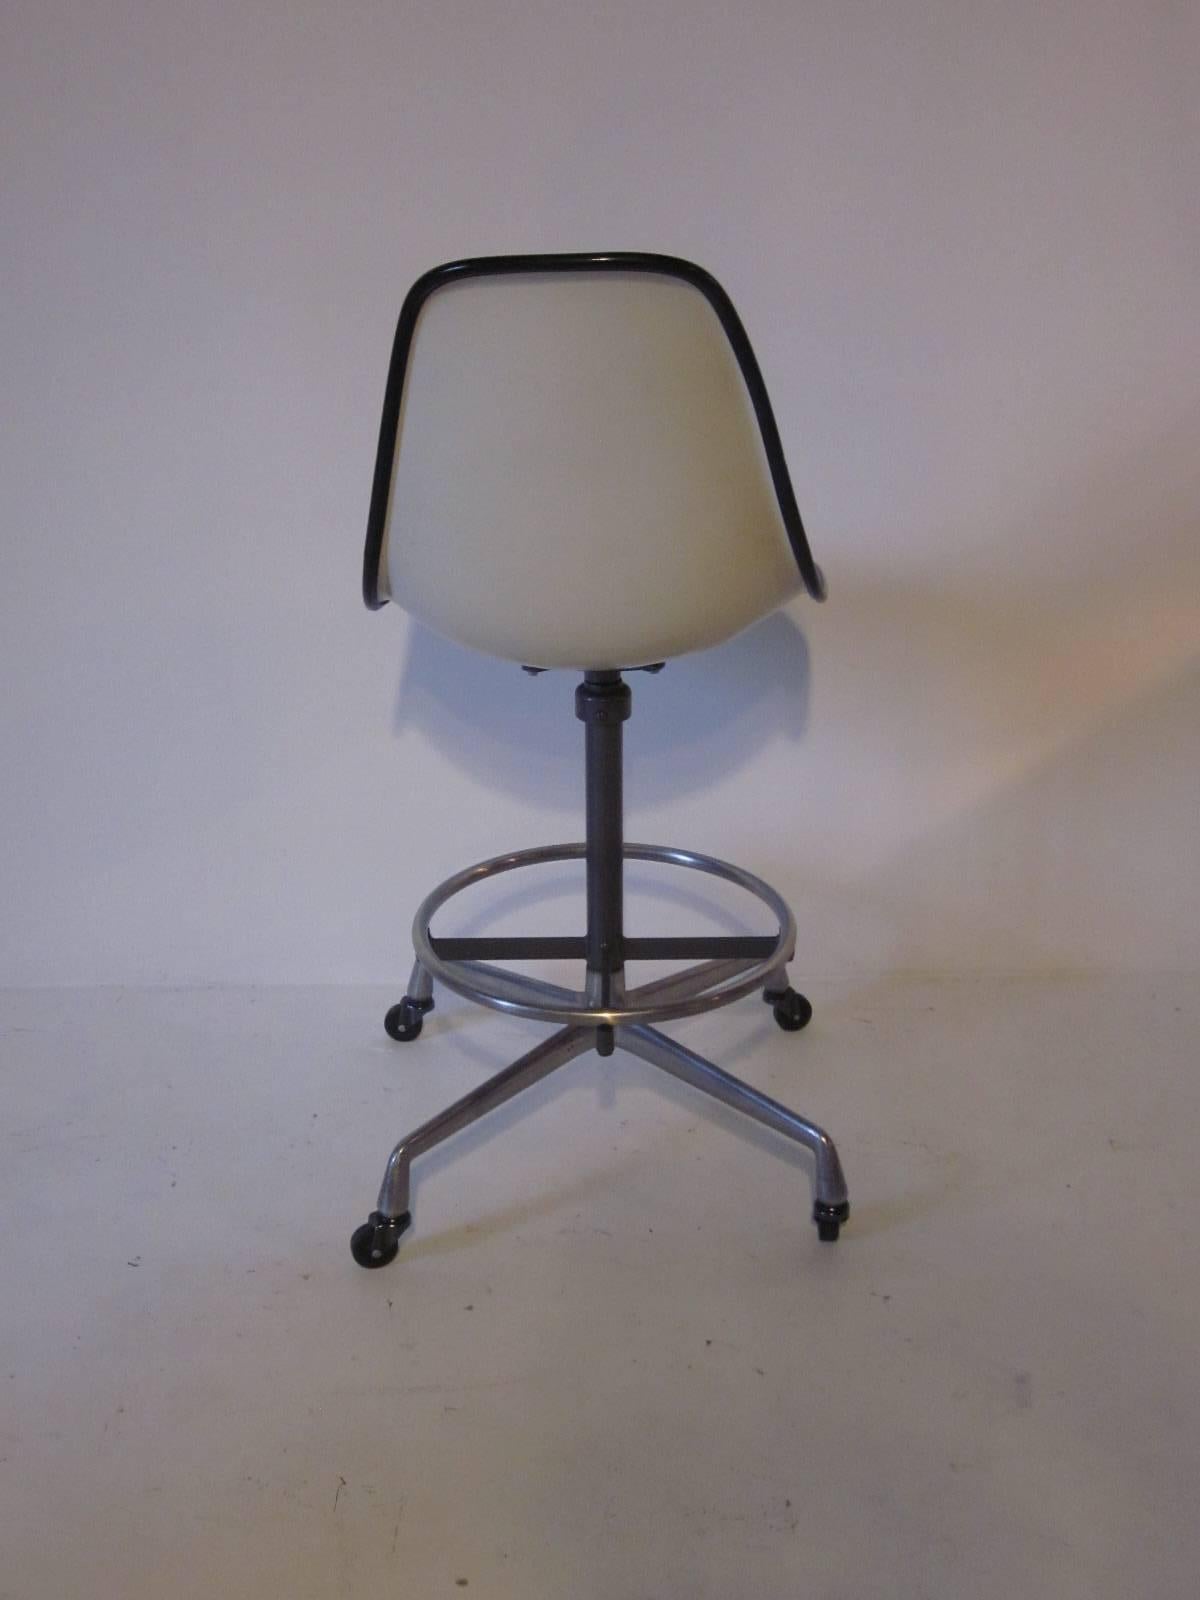 American Eames Industrial Architectural Stools